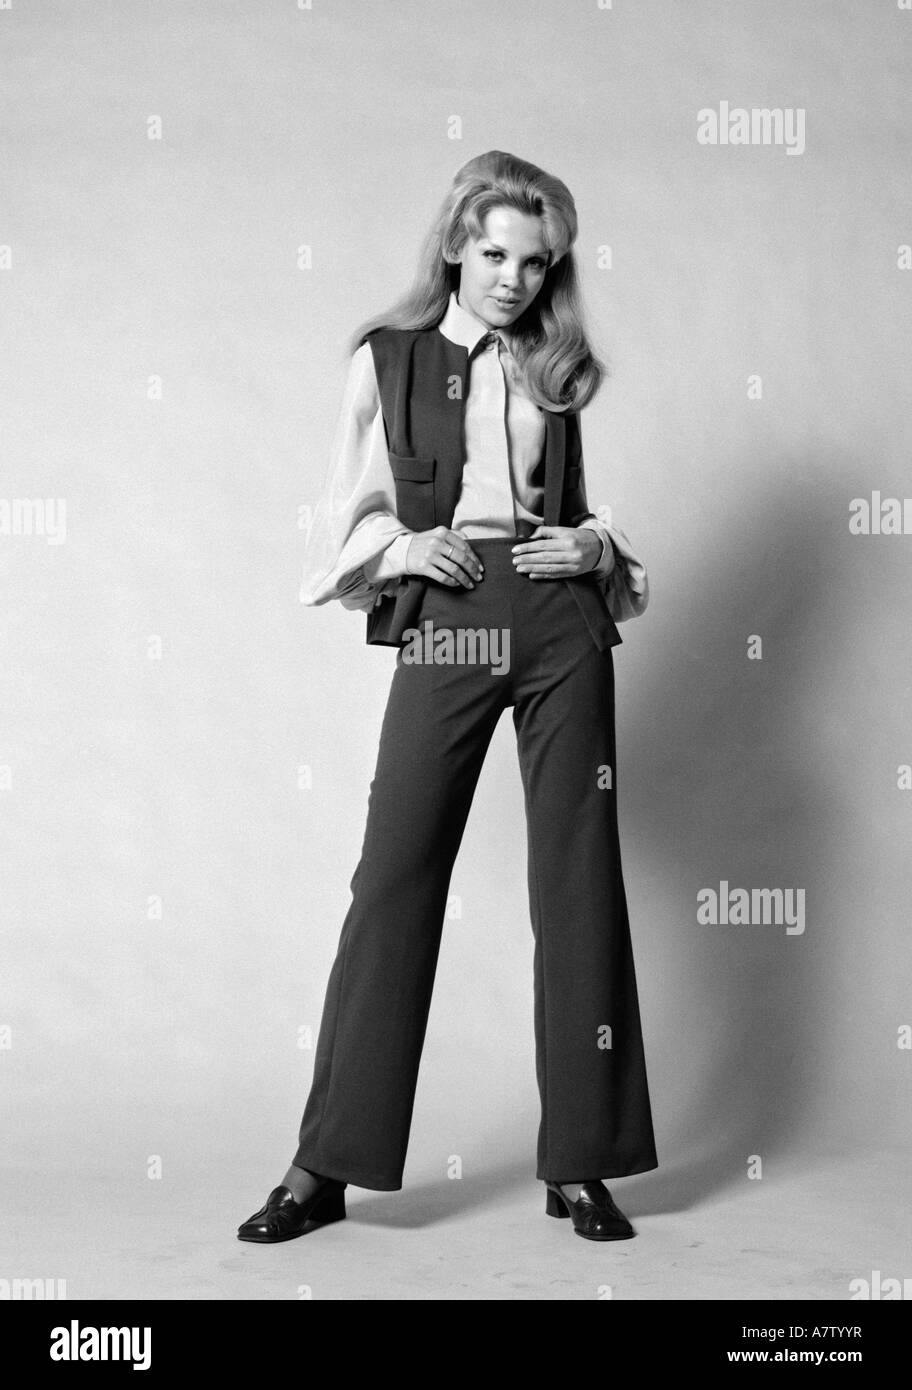 1960s 1970s PORTRAIT WOMAN WITH LONG BLOND HAIR WEARING FLARED PANTSUIT WITH VEST Stock Photo